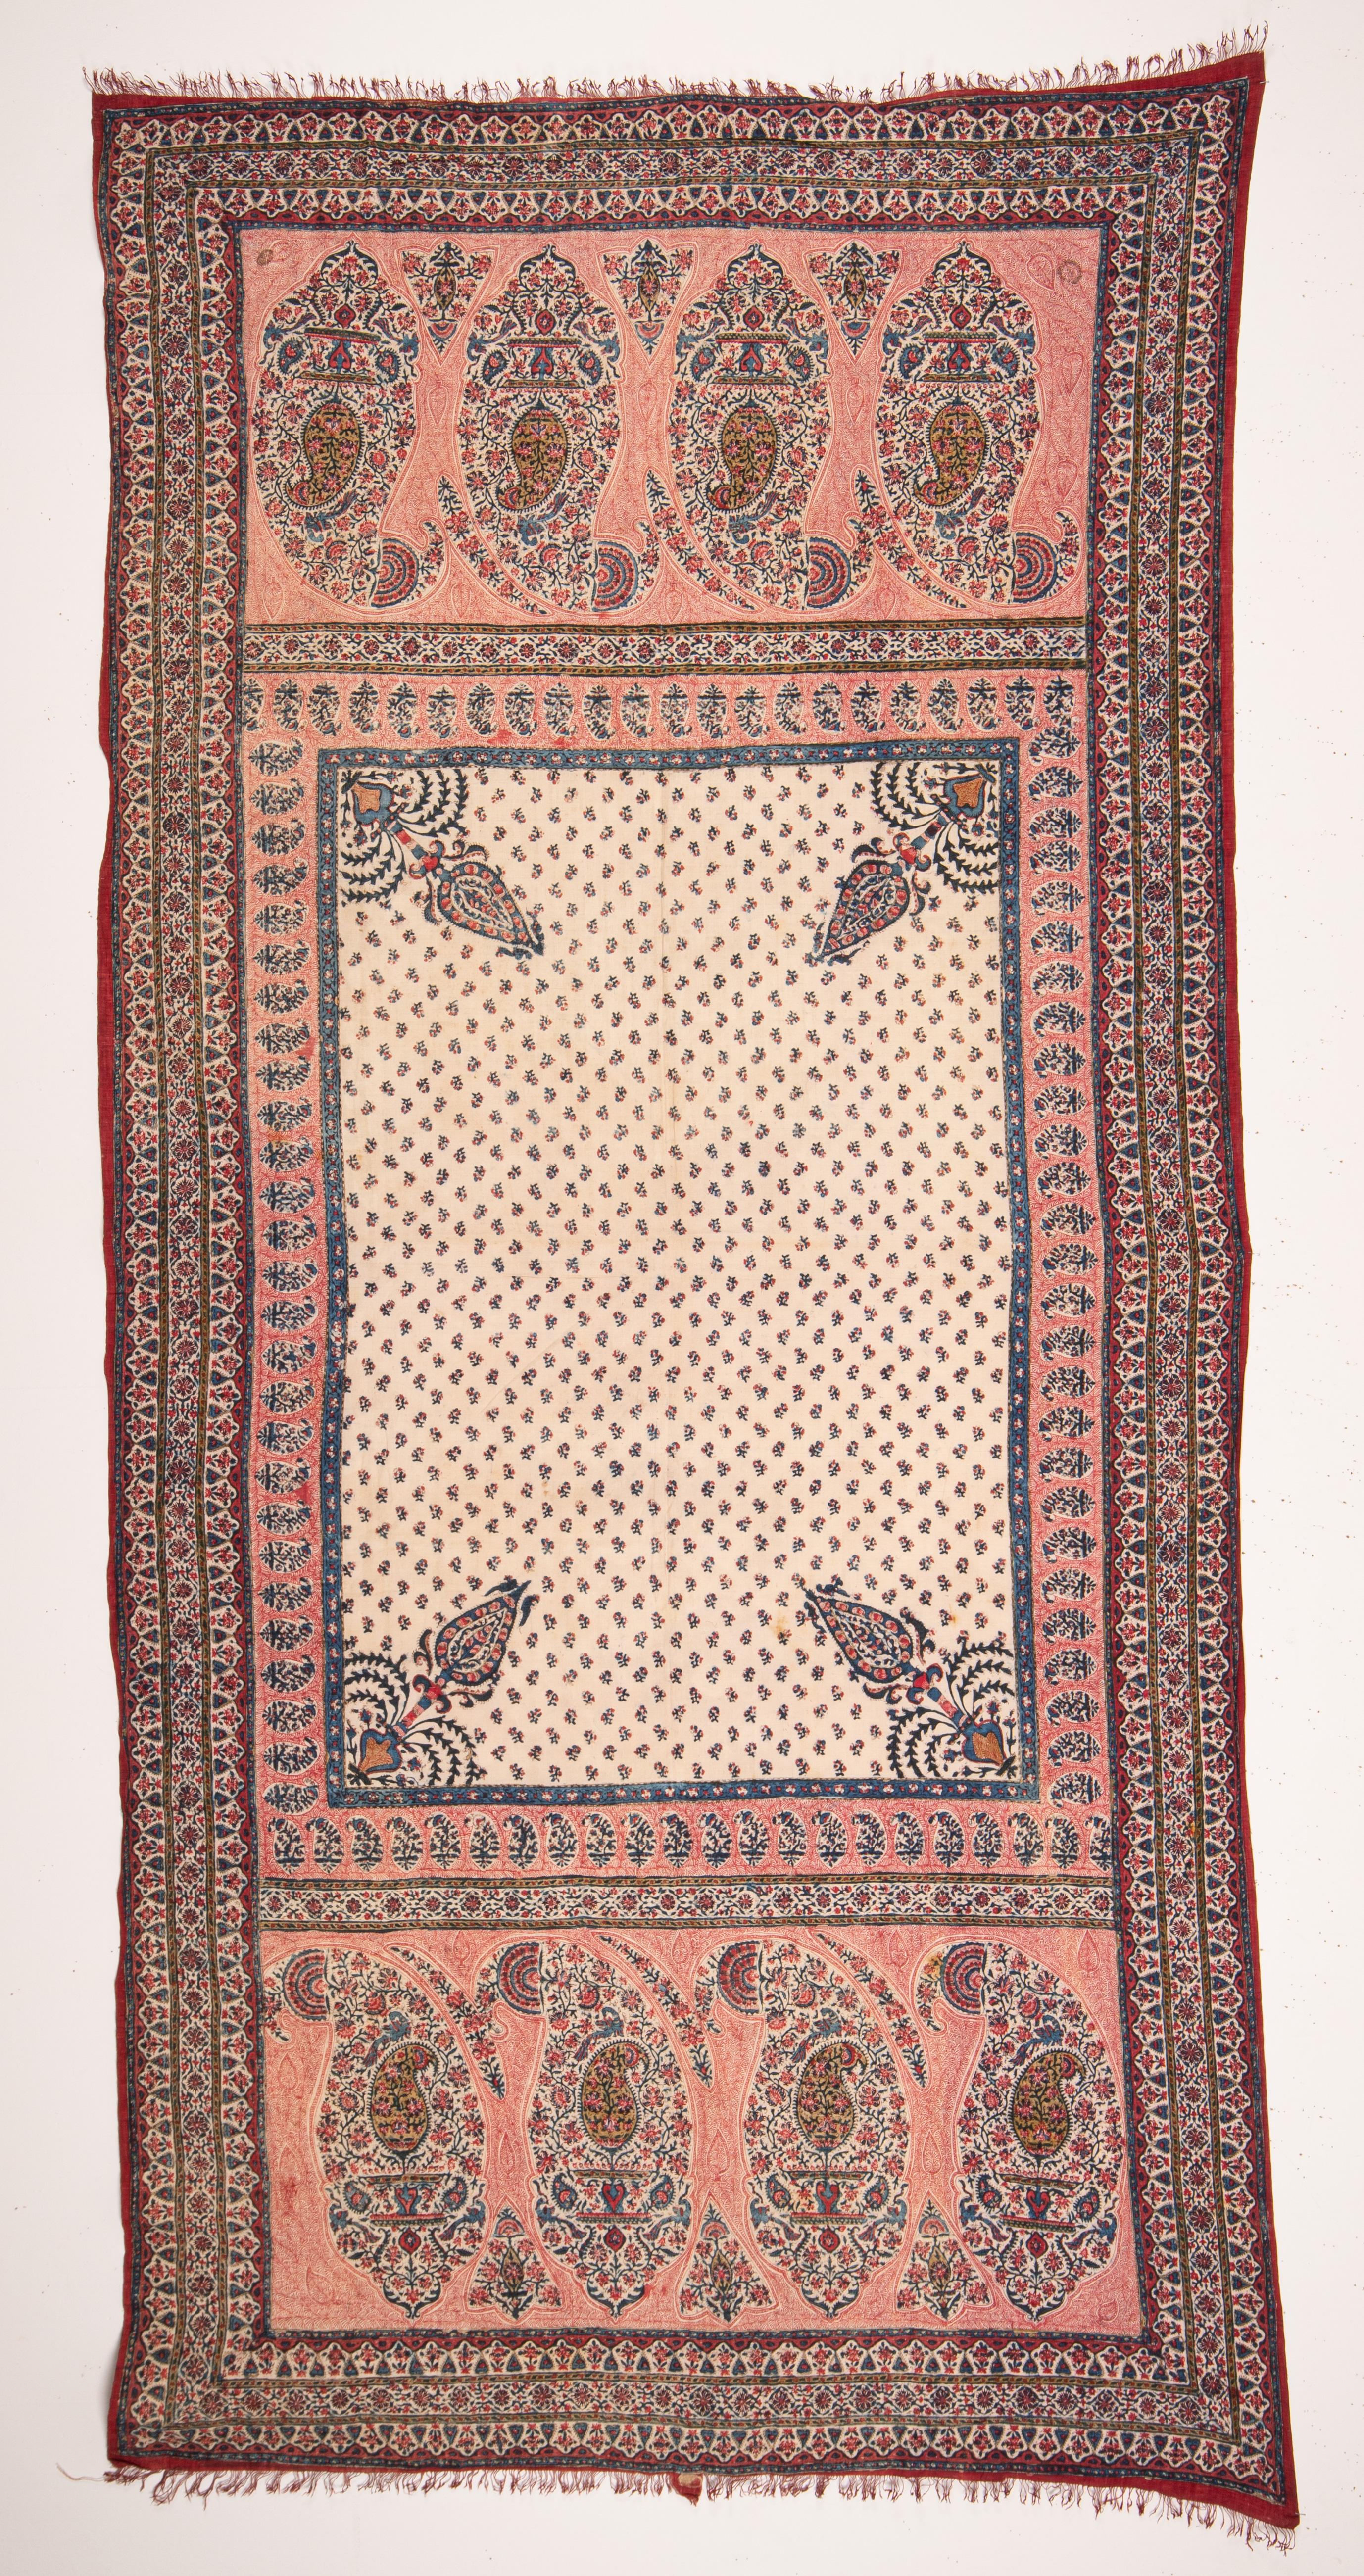 This is a finely executed kalamkari work with well saturated colors.